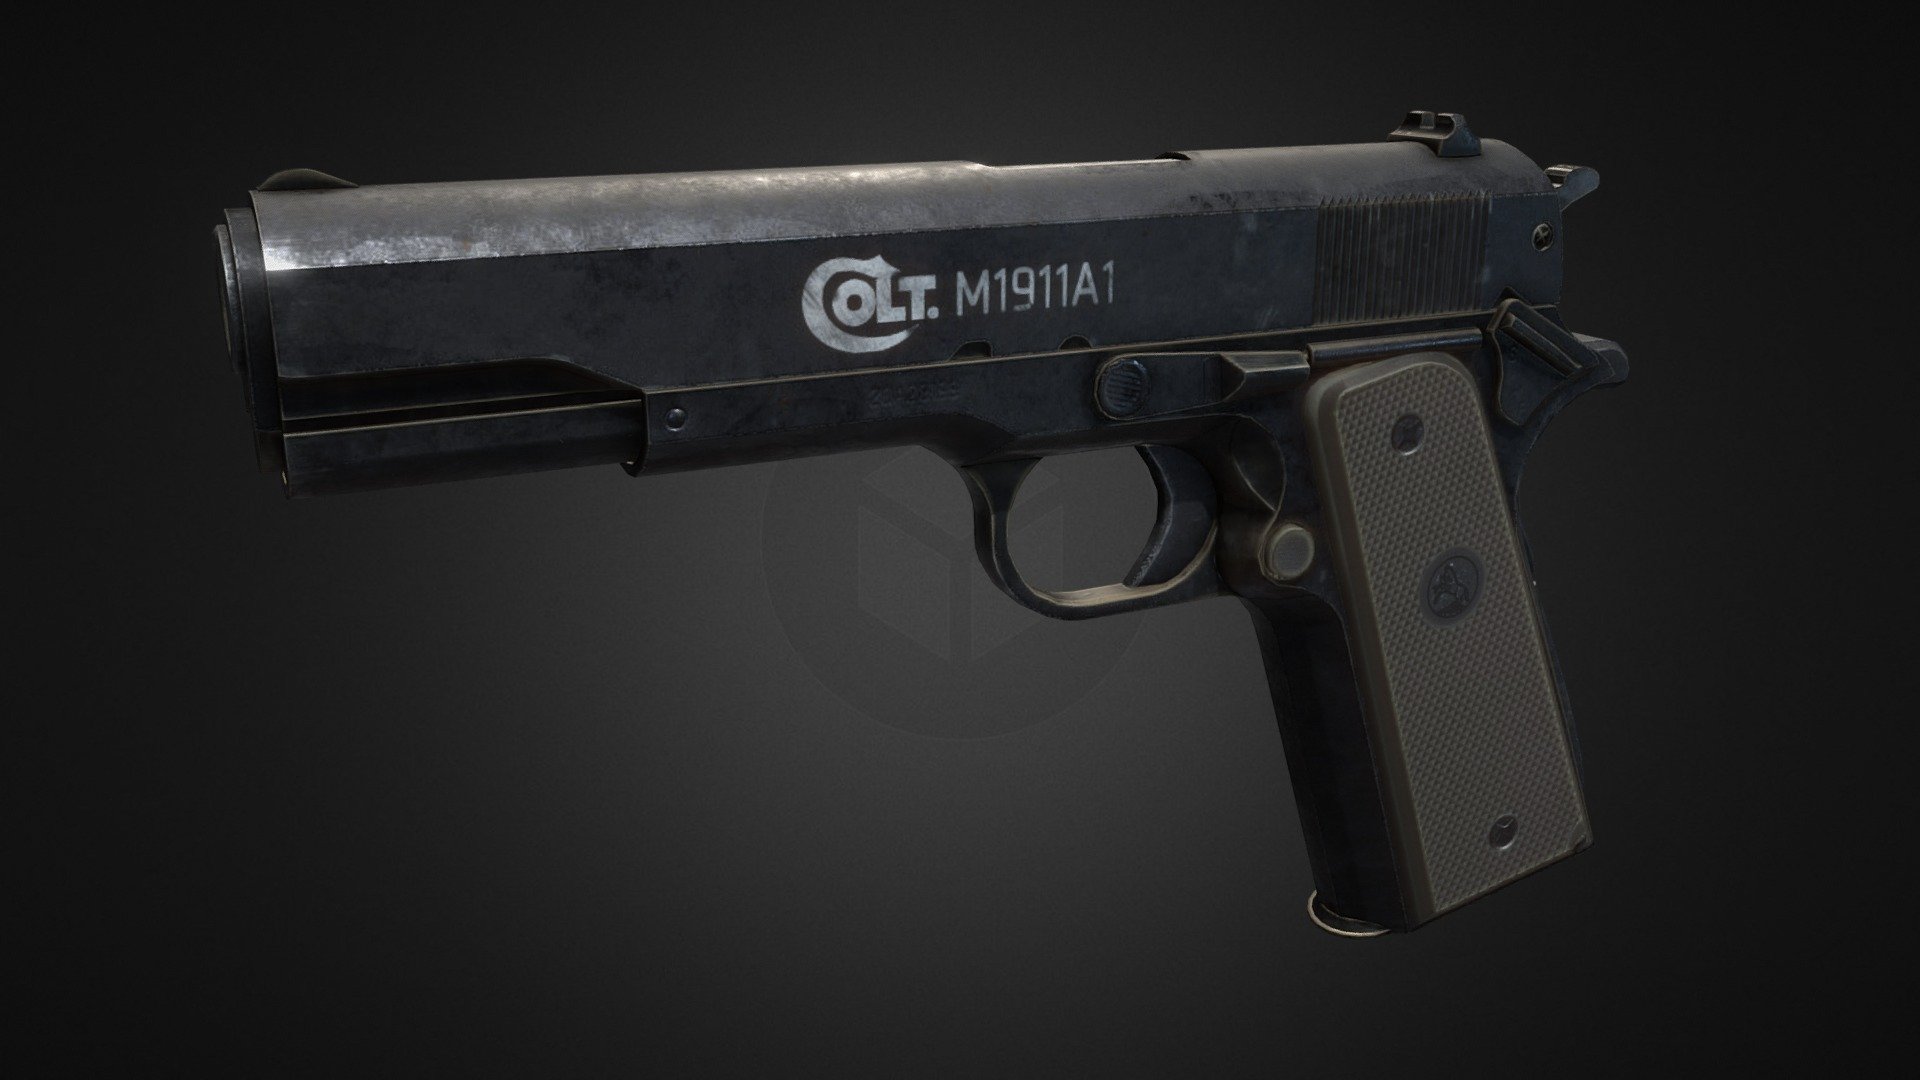 This is a gun inspired by the Colt M1911 Pistol created as a hard surface exercise 3d model